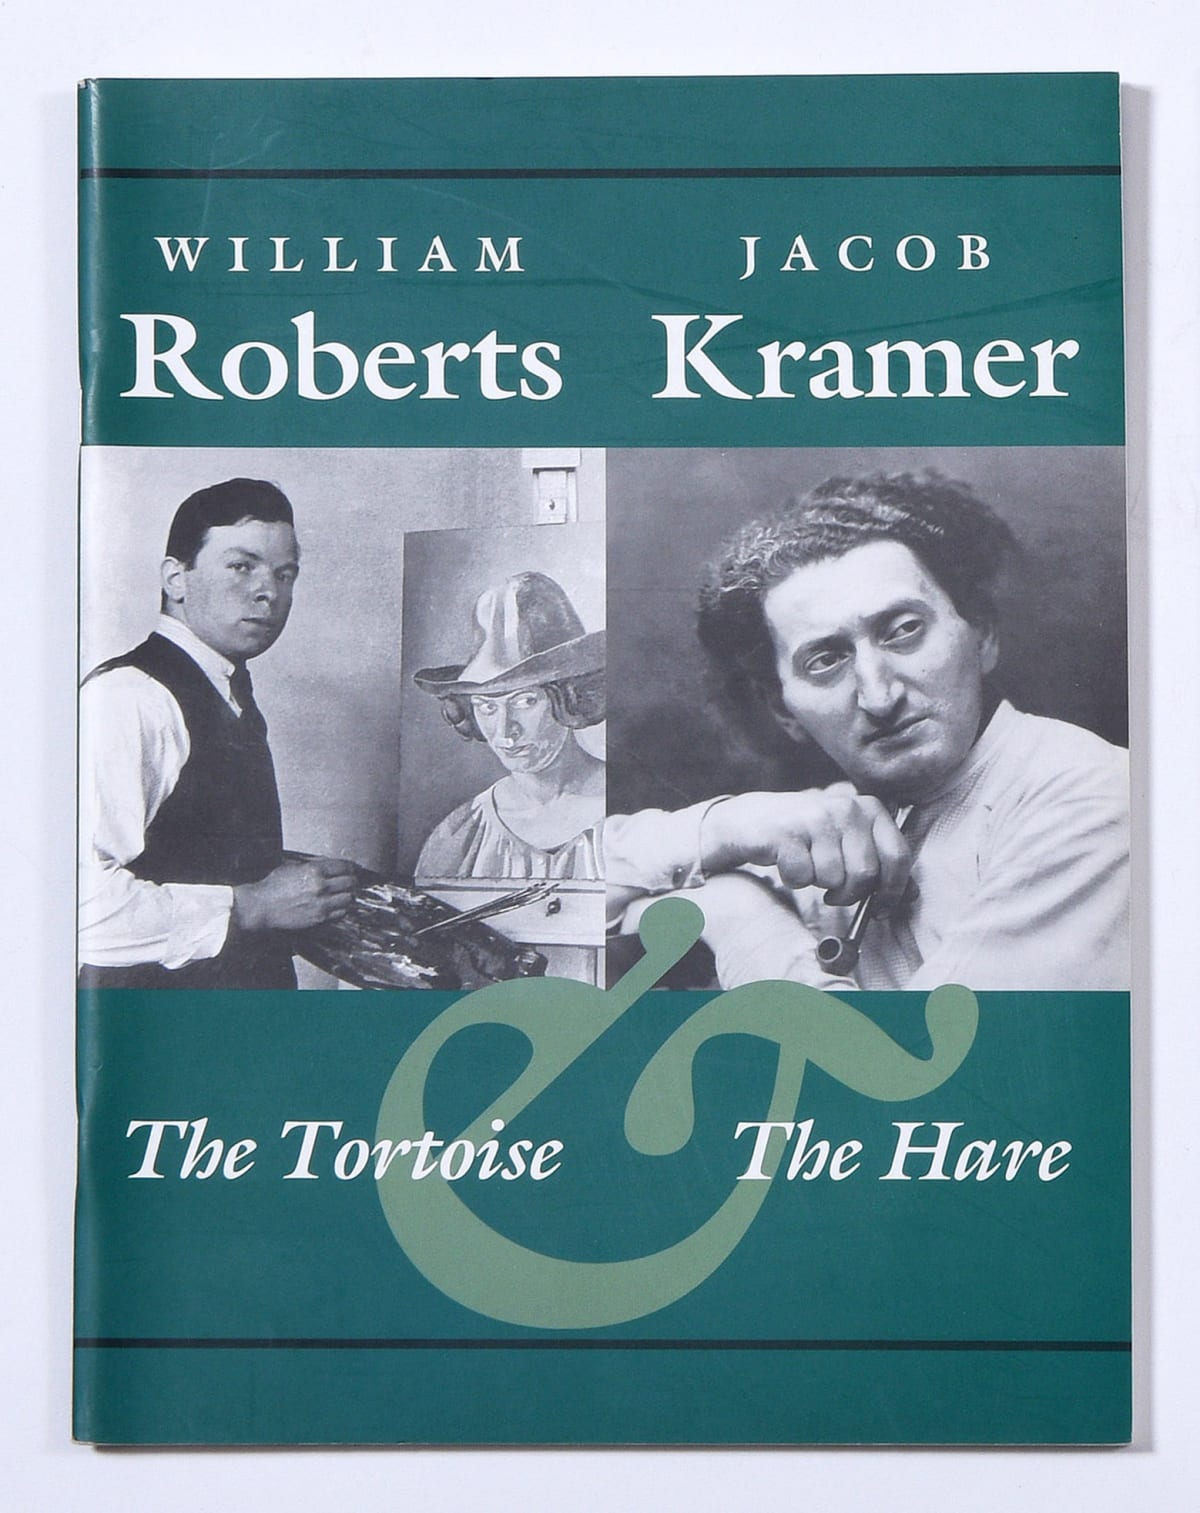 The Tortoise and the Hare - Jacob Kramer & William Roberts